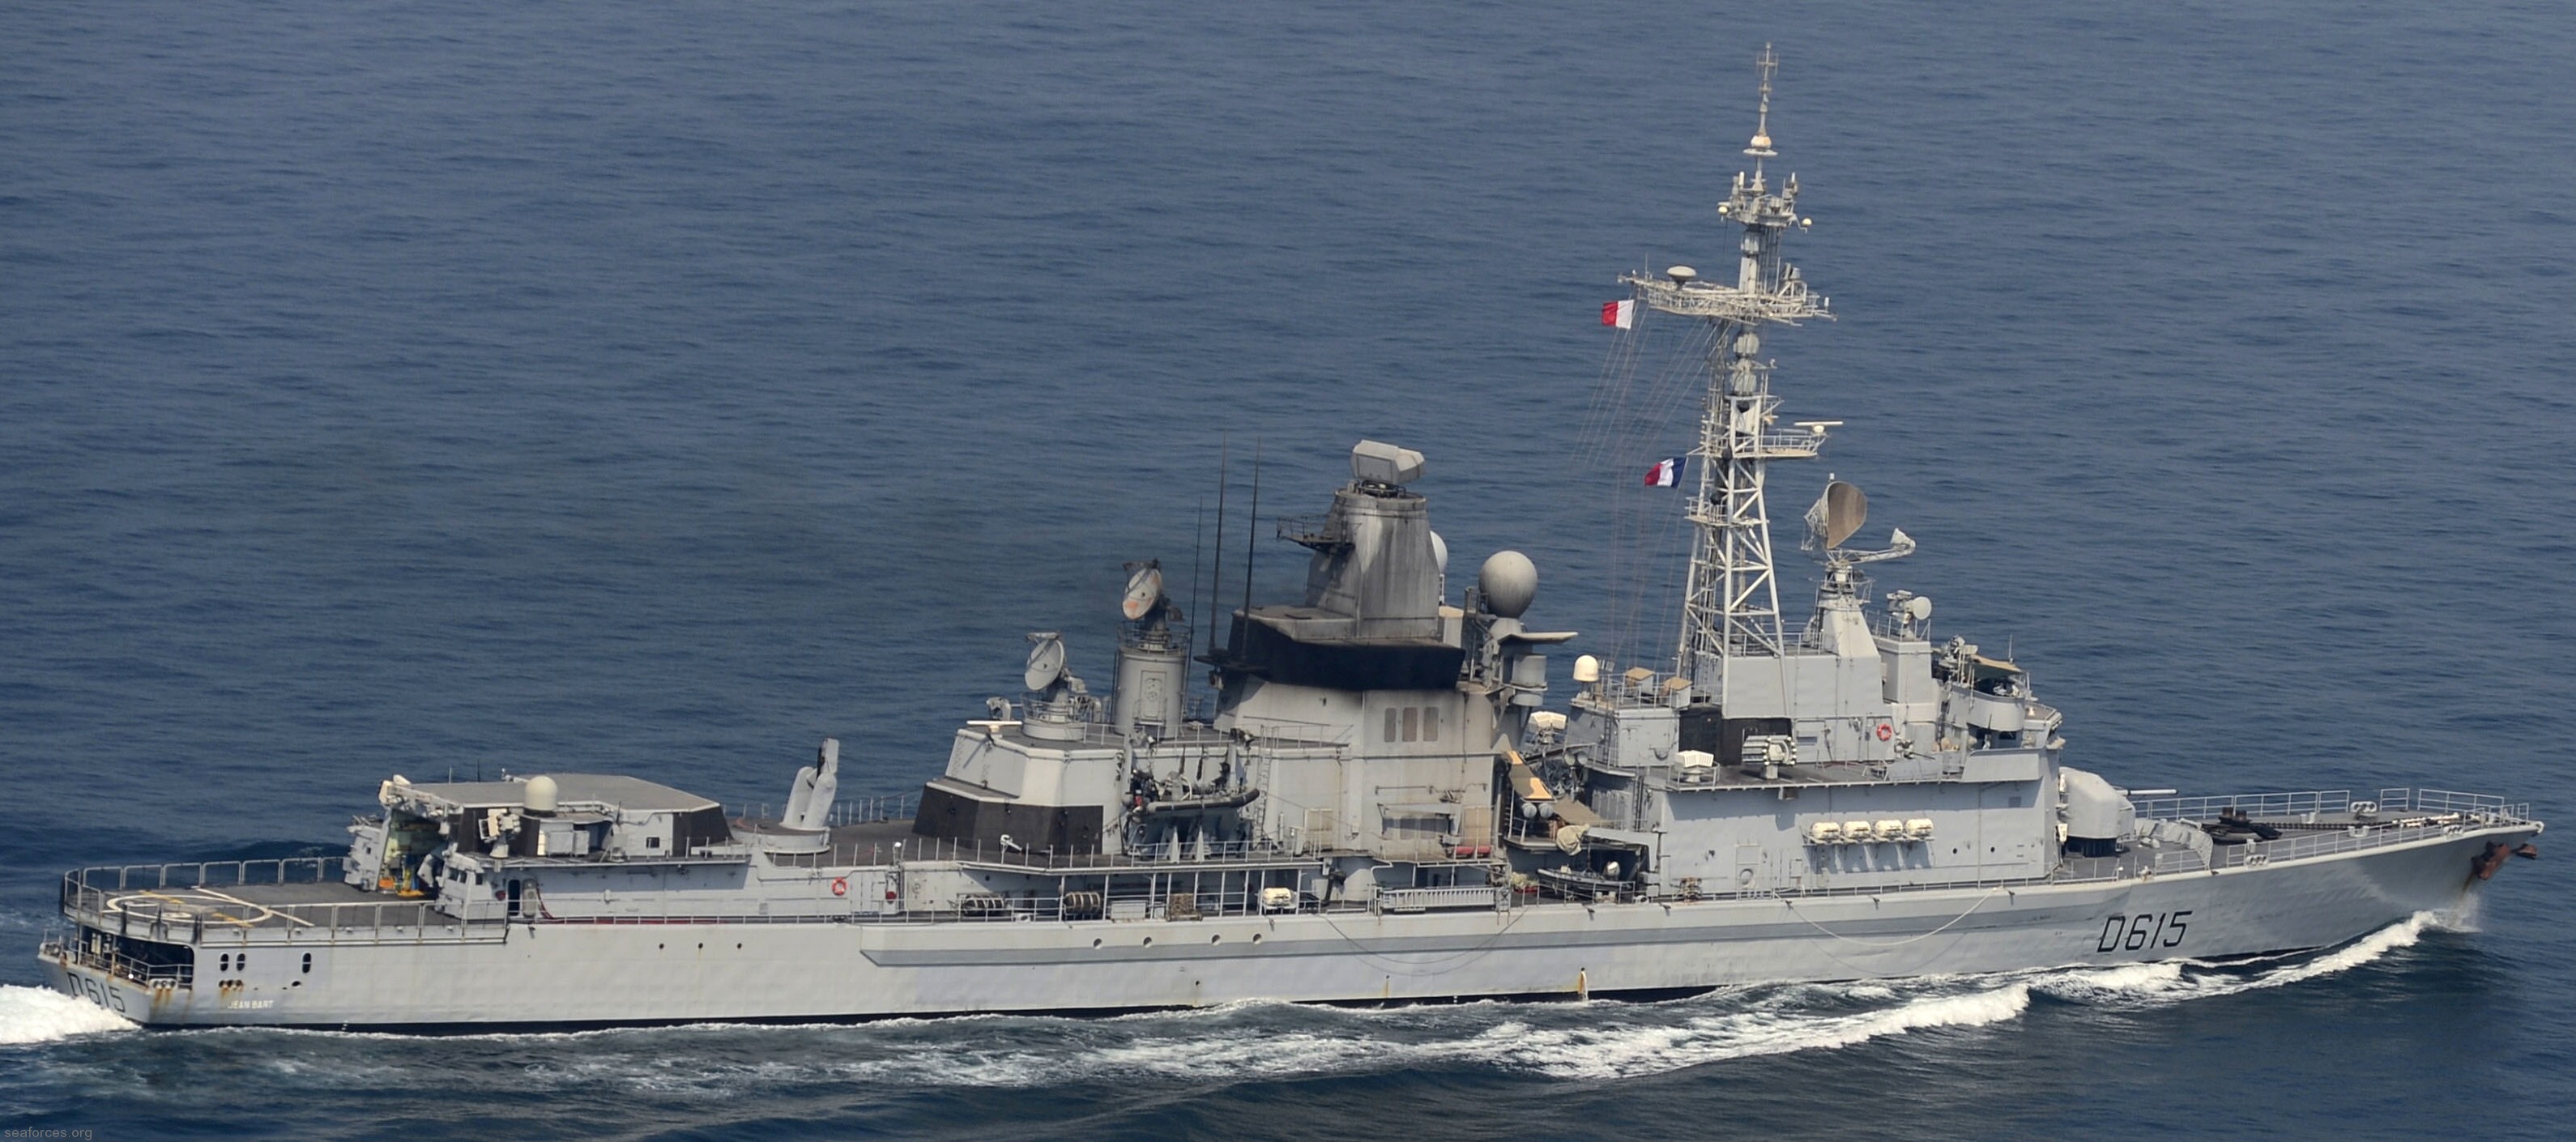 d-615 fs jean bart cassard f70aa class guided missile frigate ffgh ddg french navy marine nationale 06